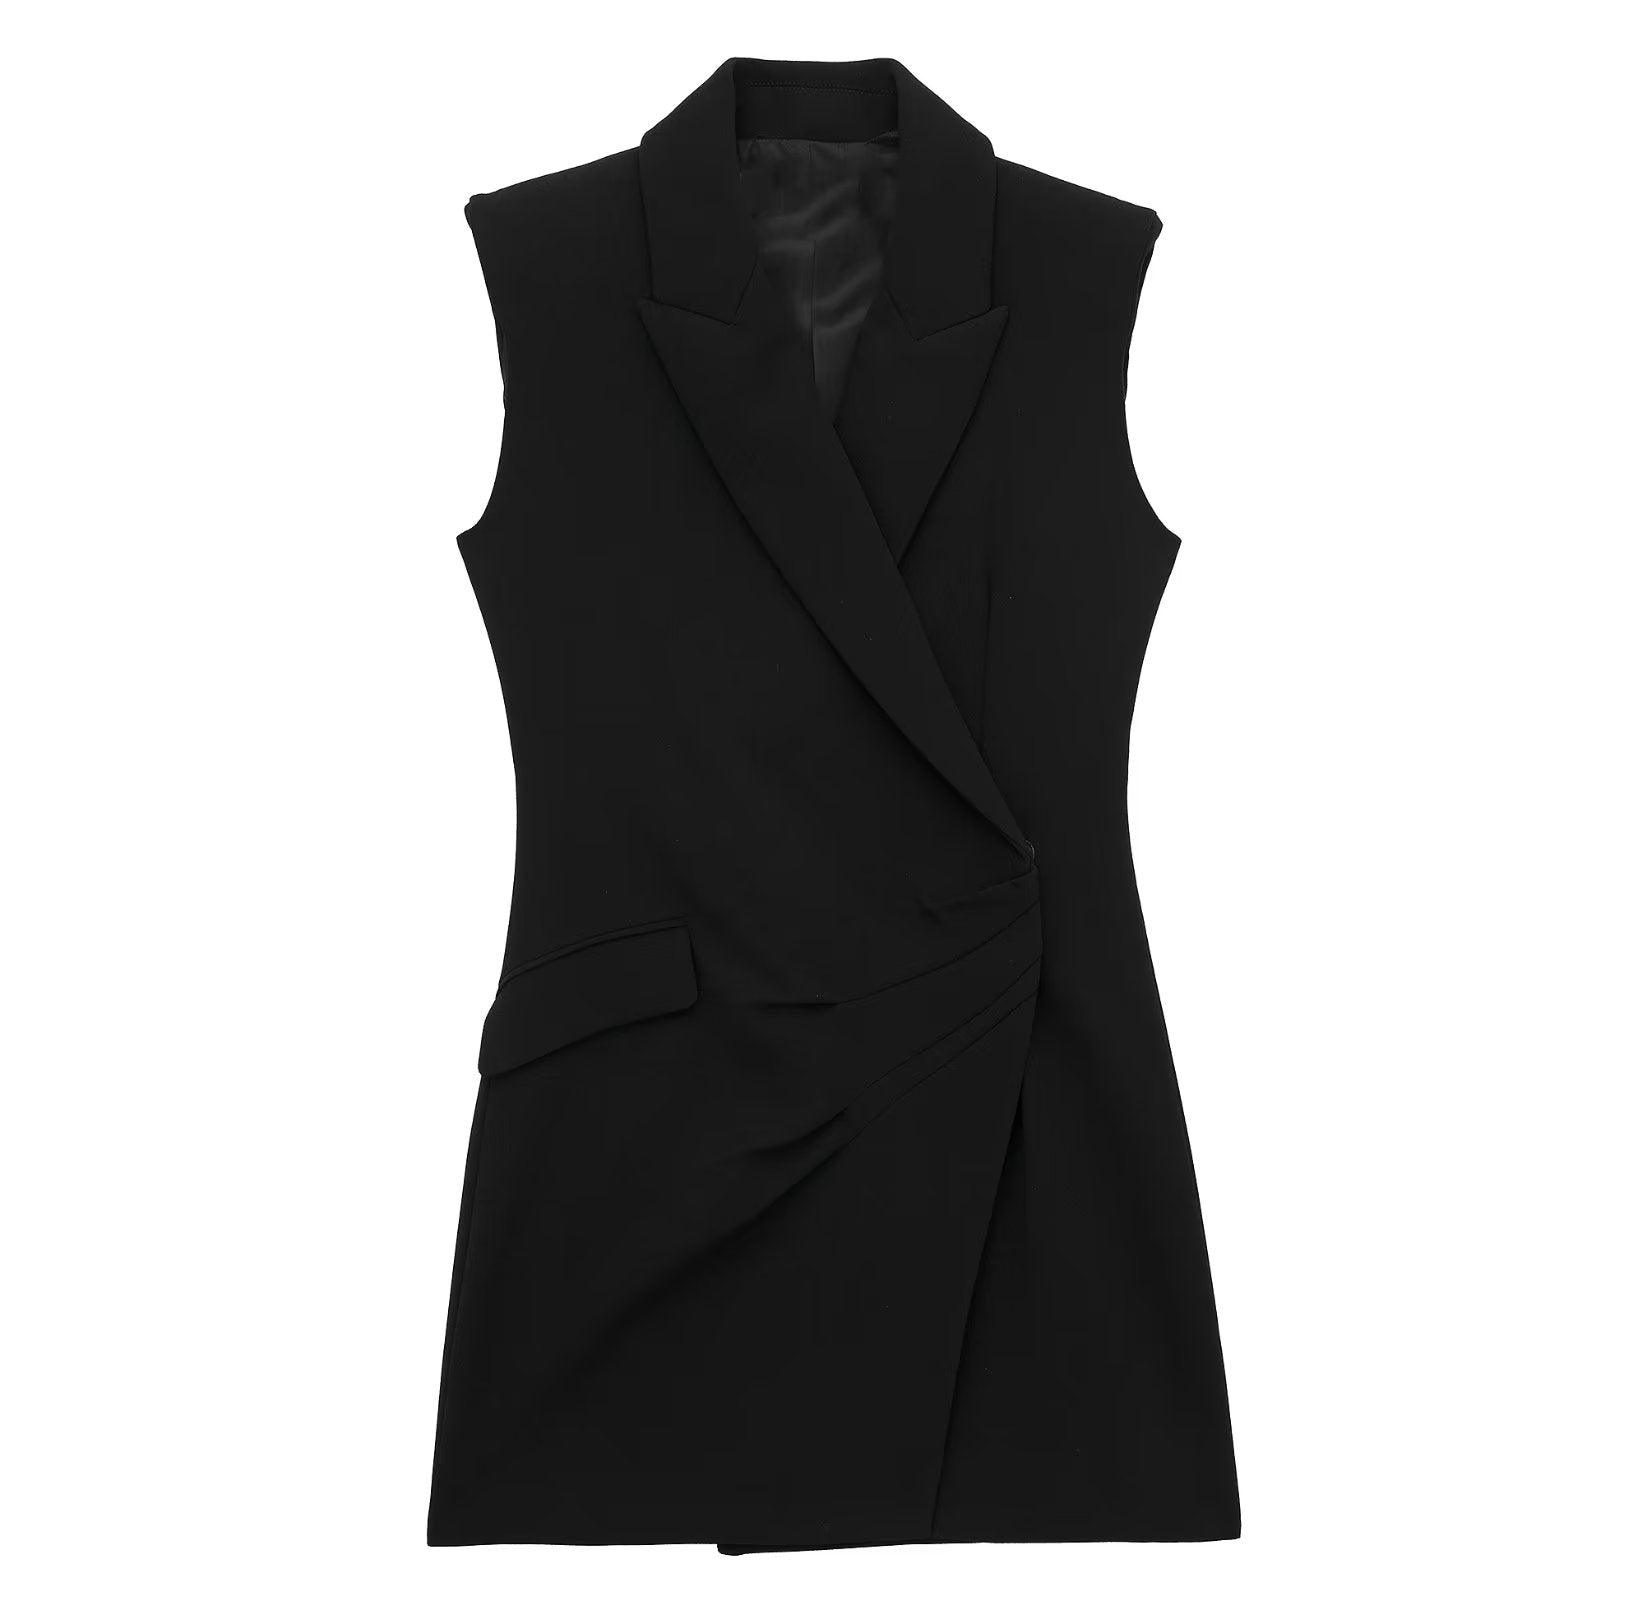 Chic and Timeless: Women's Black Double Breasted Dress - ForVanity dress, Office Dress Office Dress